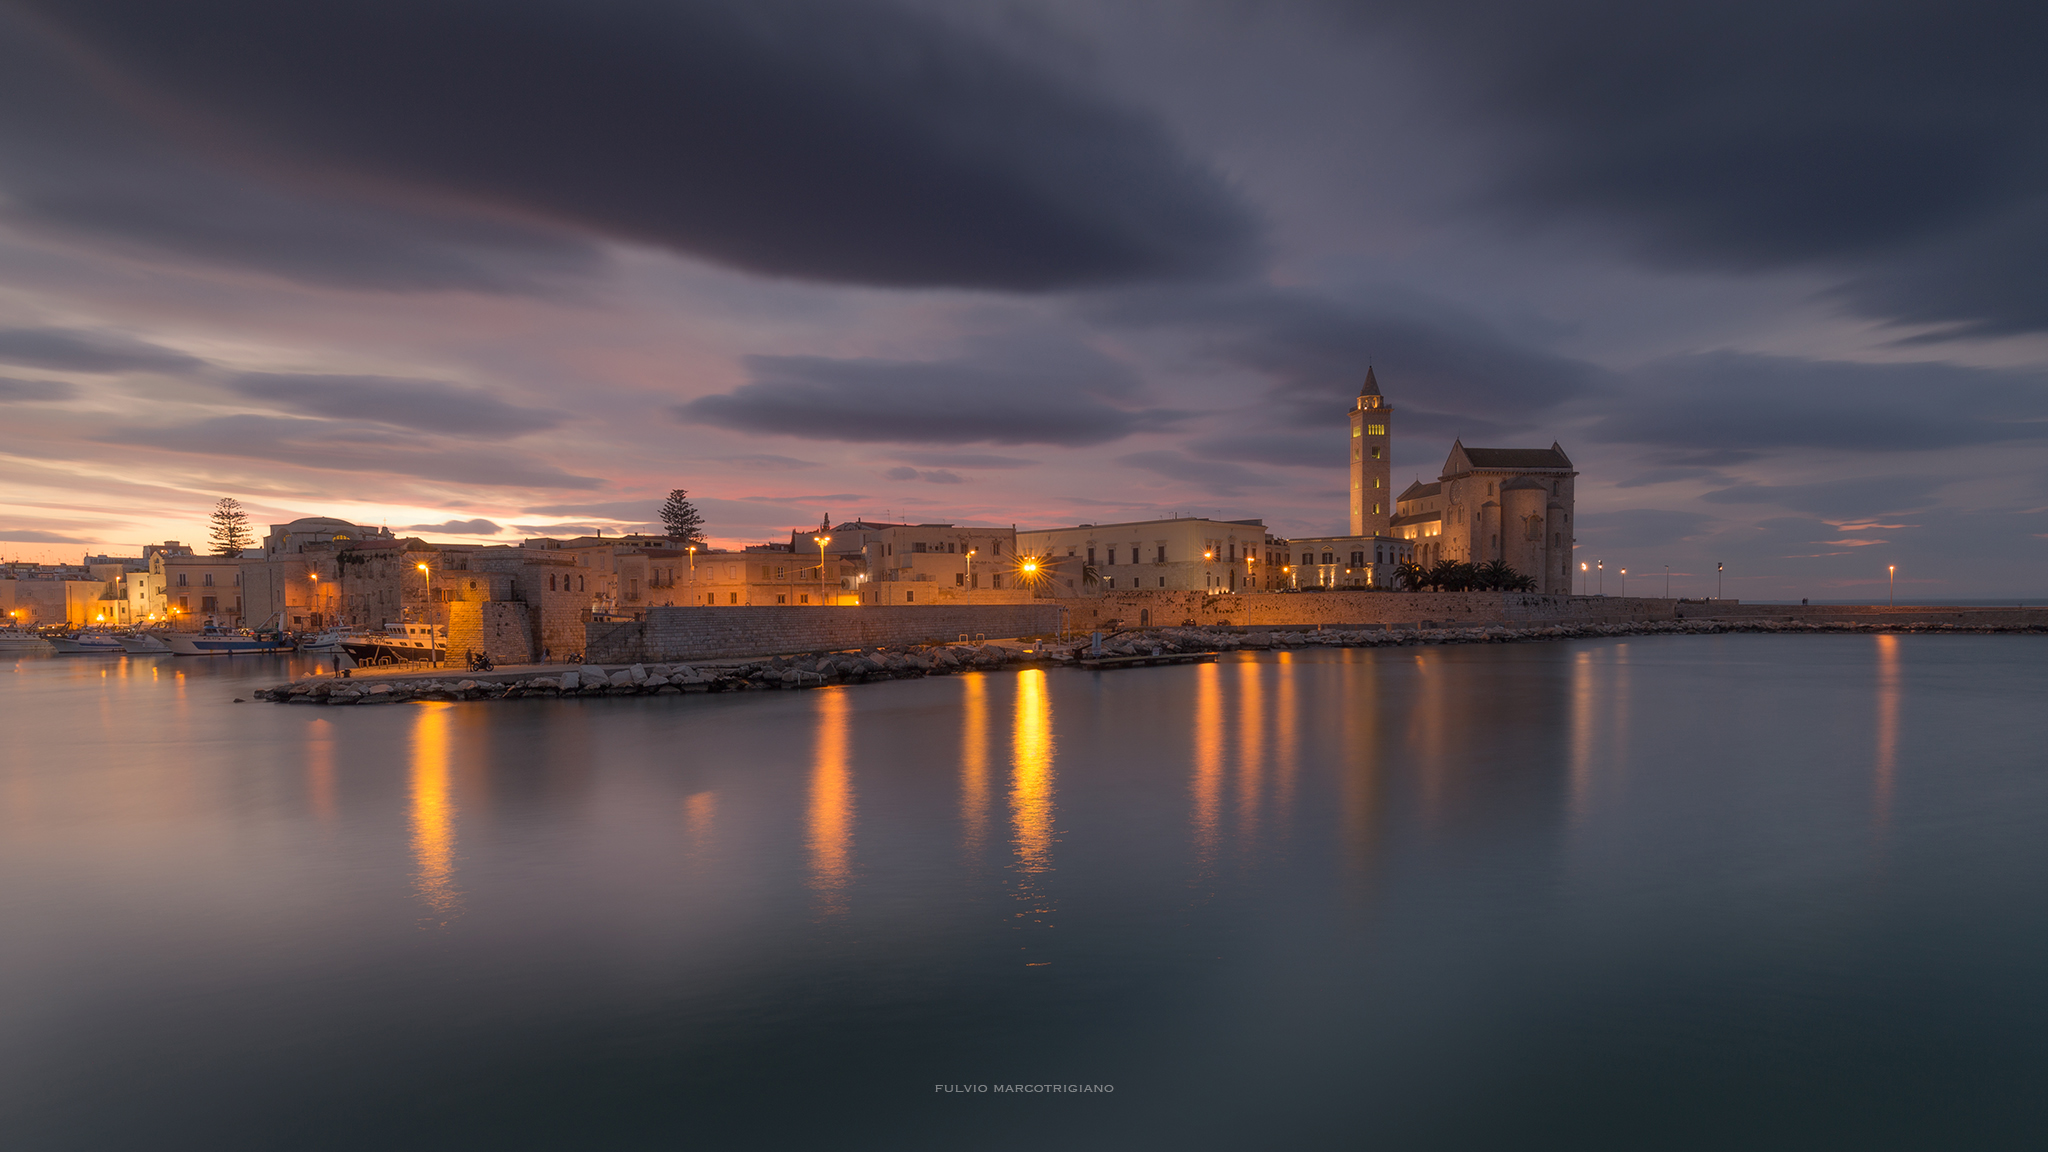 Epic sunset over the port of Trani...